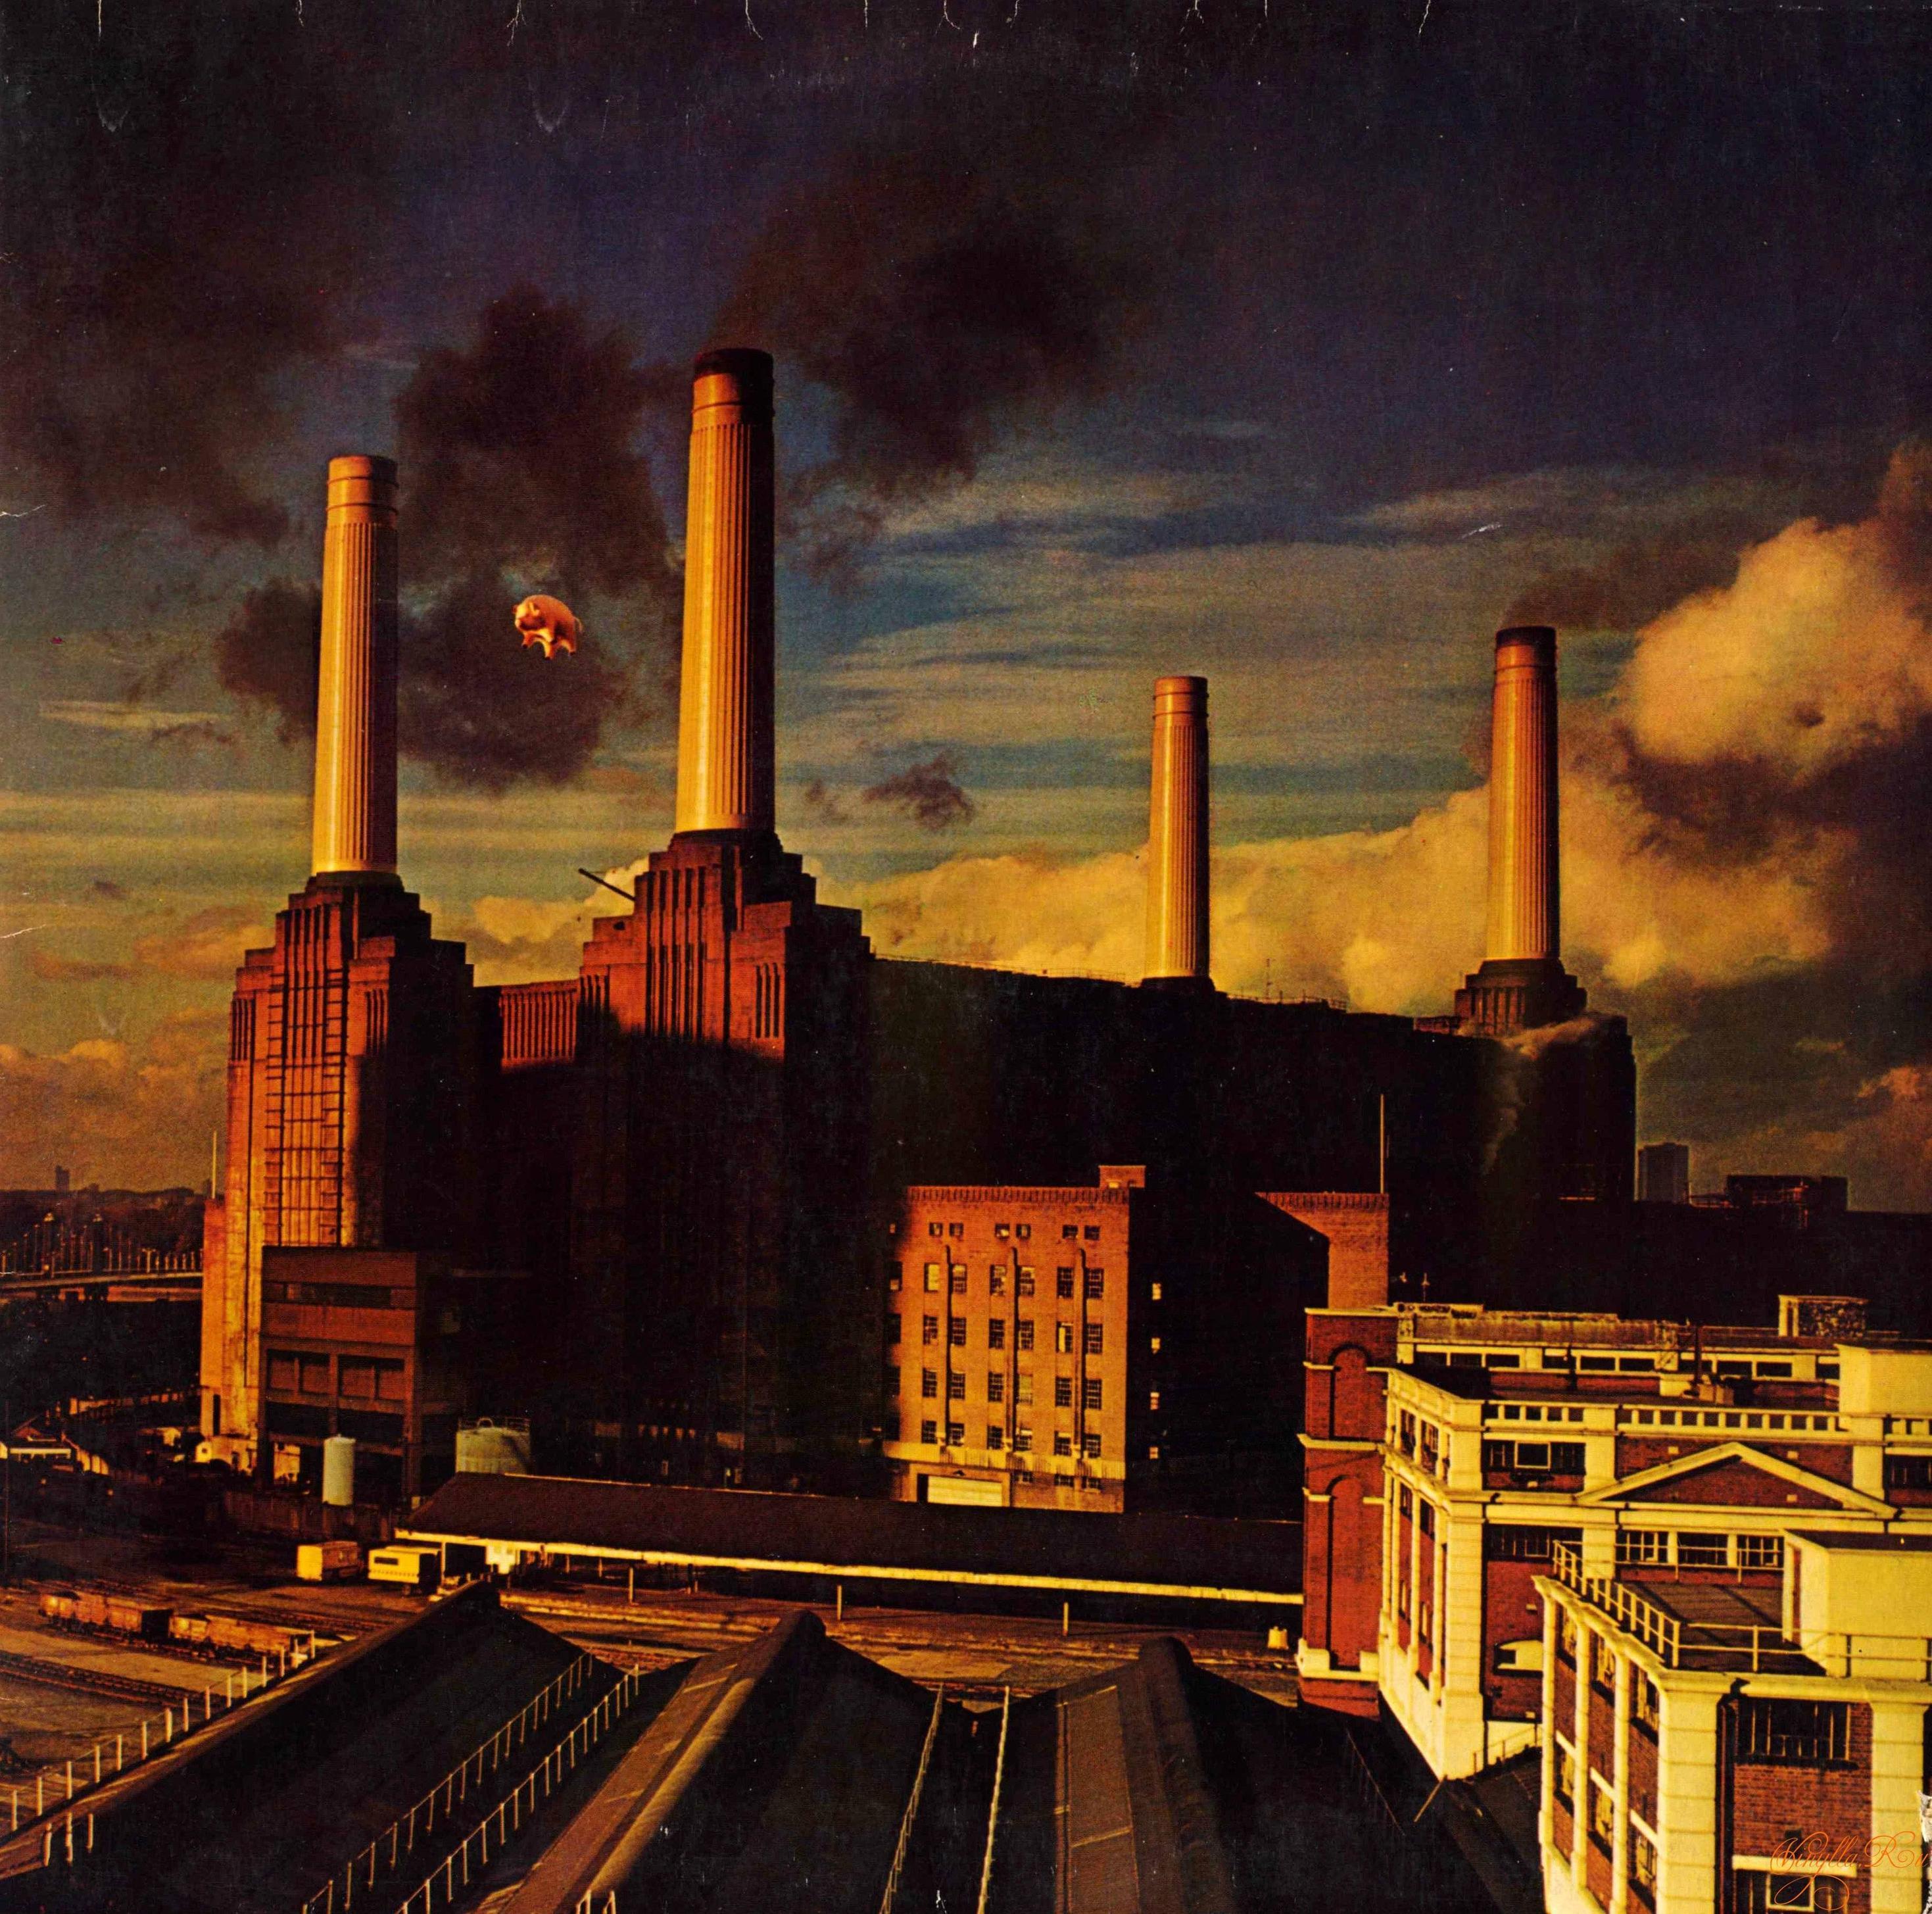 Pink Floyd Animals Wallpapers - Wallpaper Cave